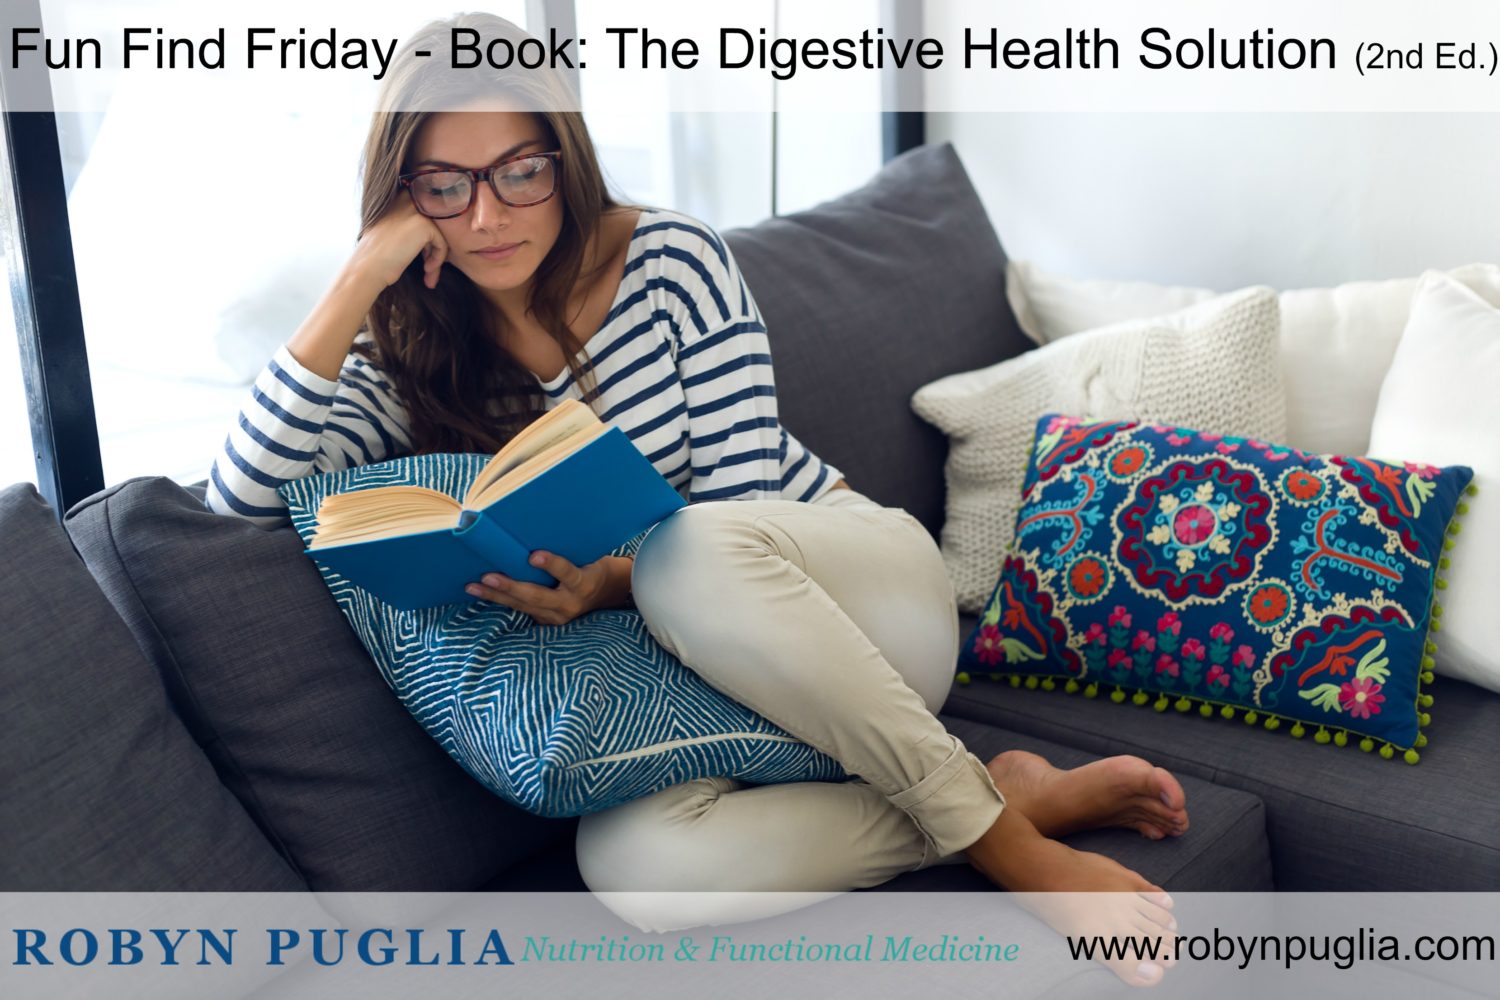 Fun Find Friday - Book: The Digestive Health Solution (2nd Ed.).